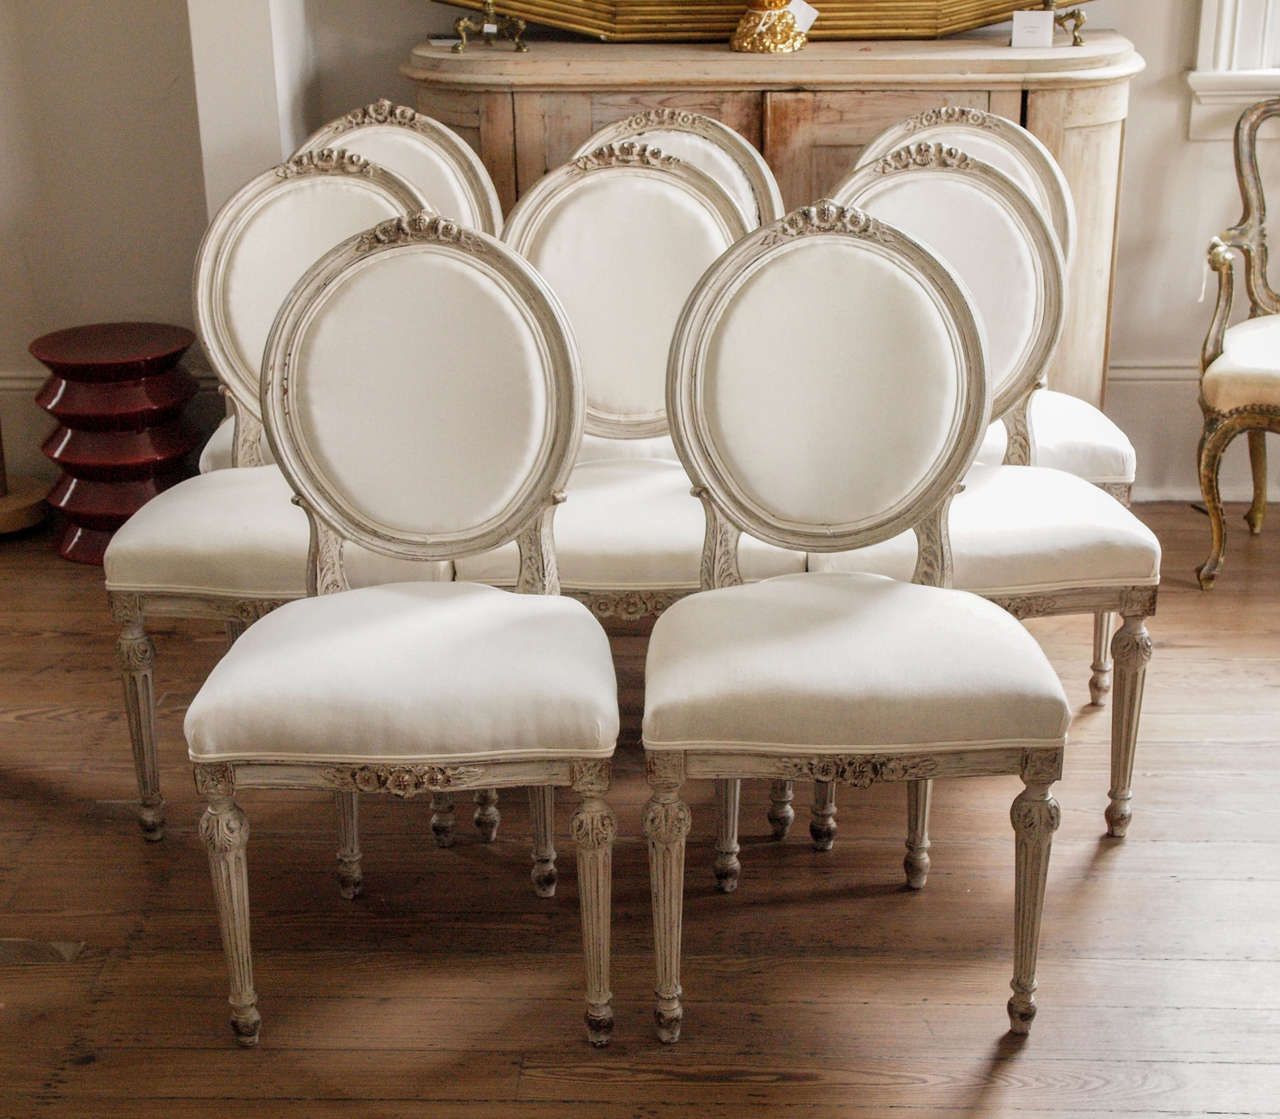 8 very comfortable Gustavian dining chairs newly upholstered in muslin.  Carving on front rail and back, fluted legs.  Pale grey paint.